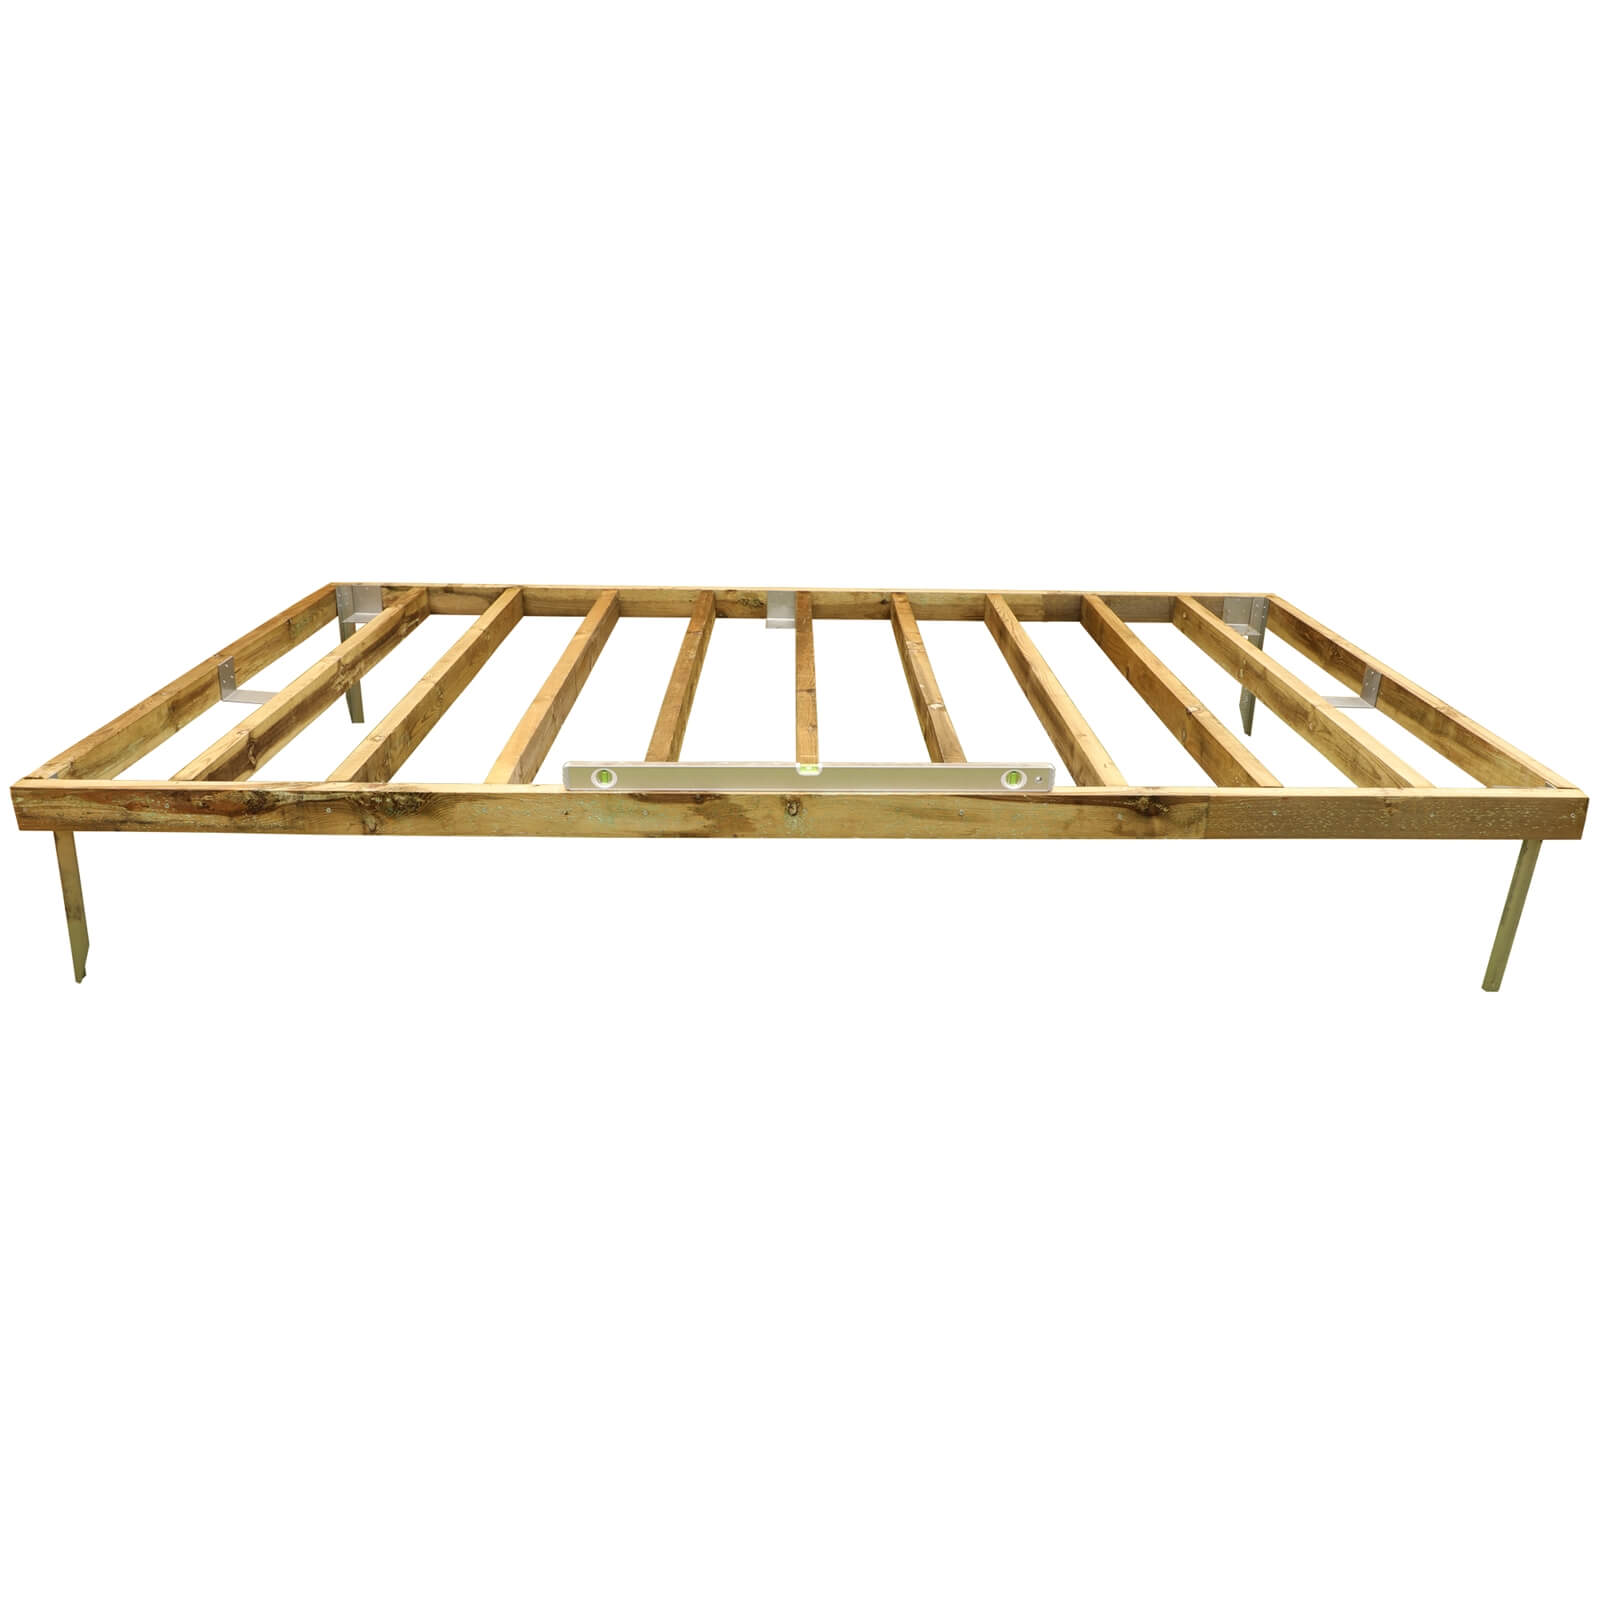 Mercia 10x6ft Pressure Treated Wooden Shed Base